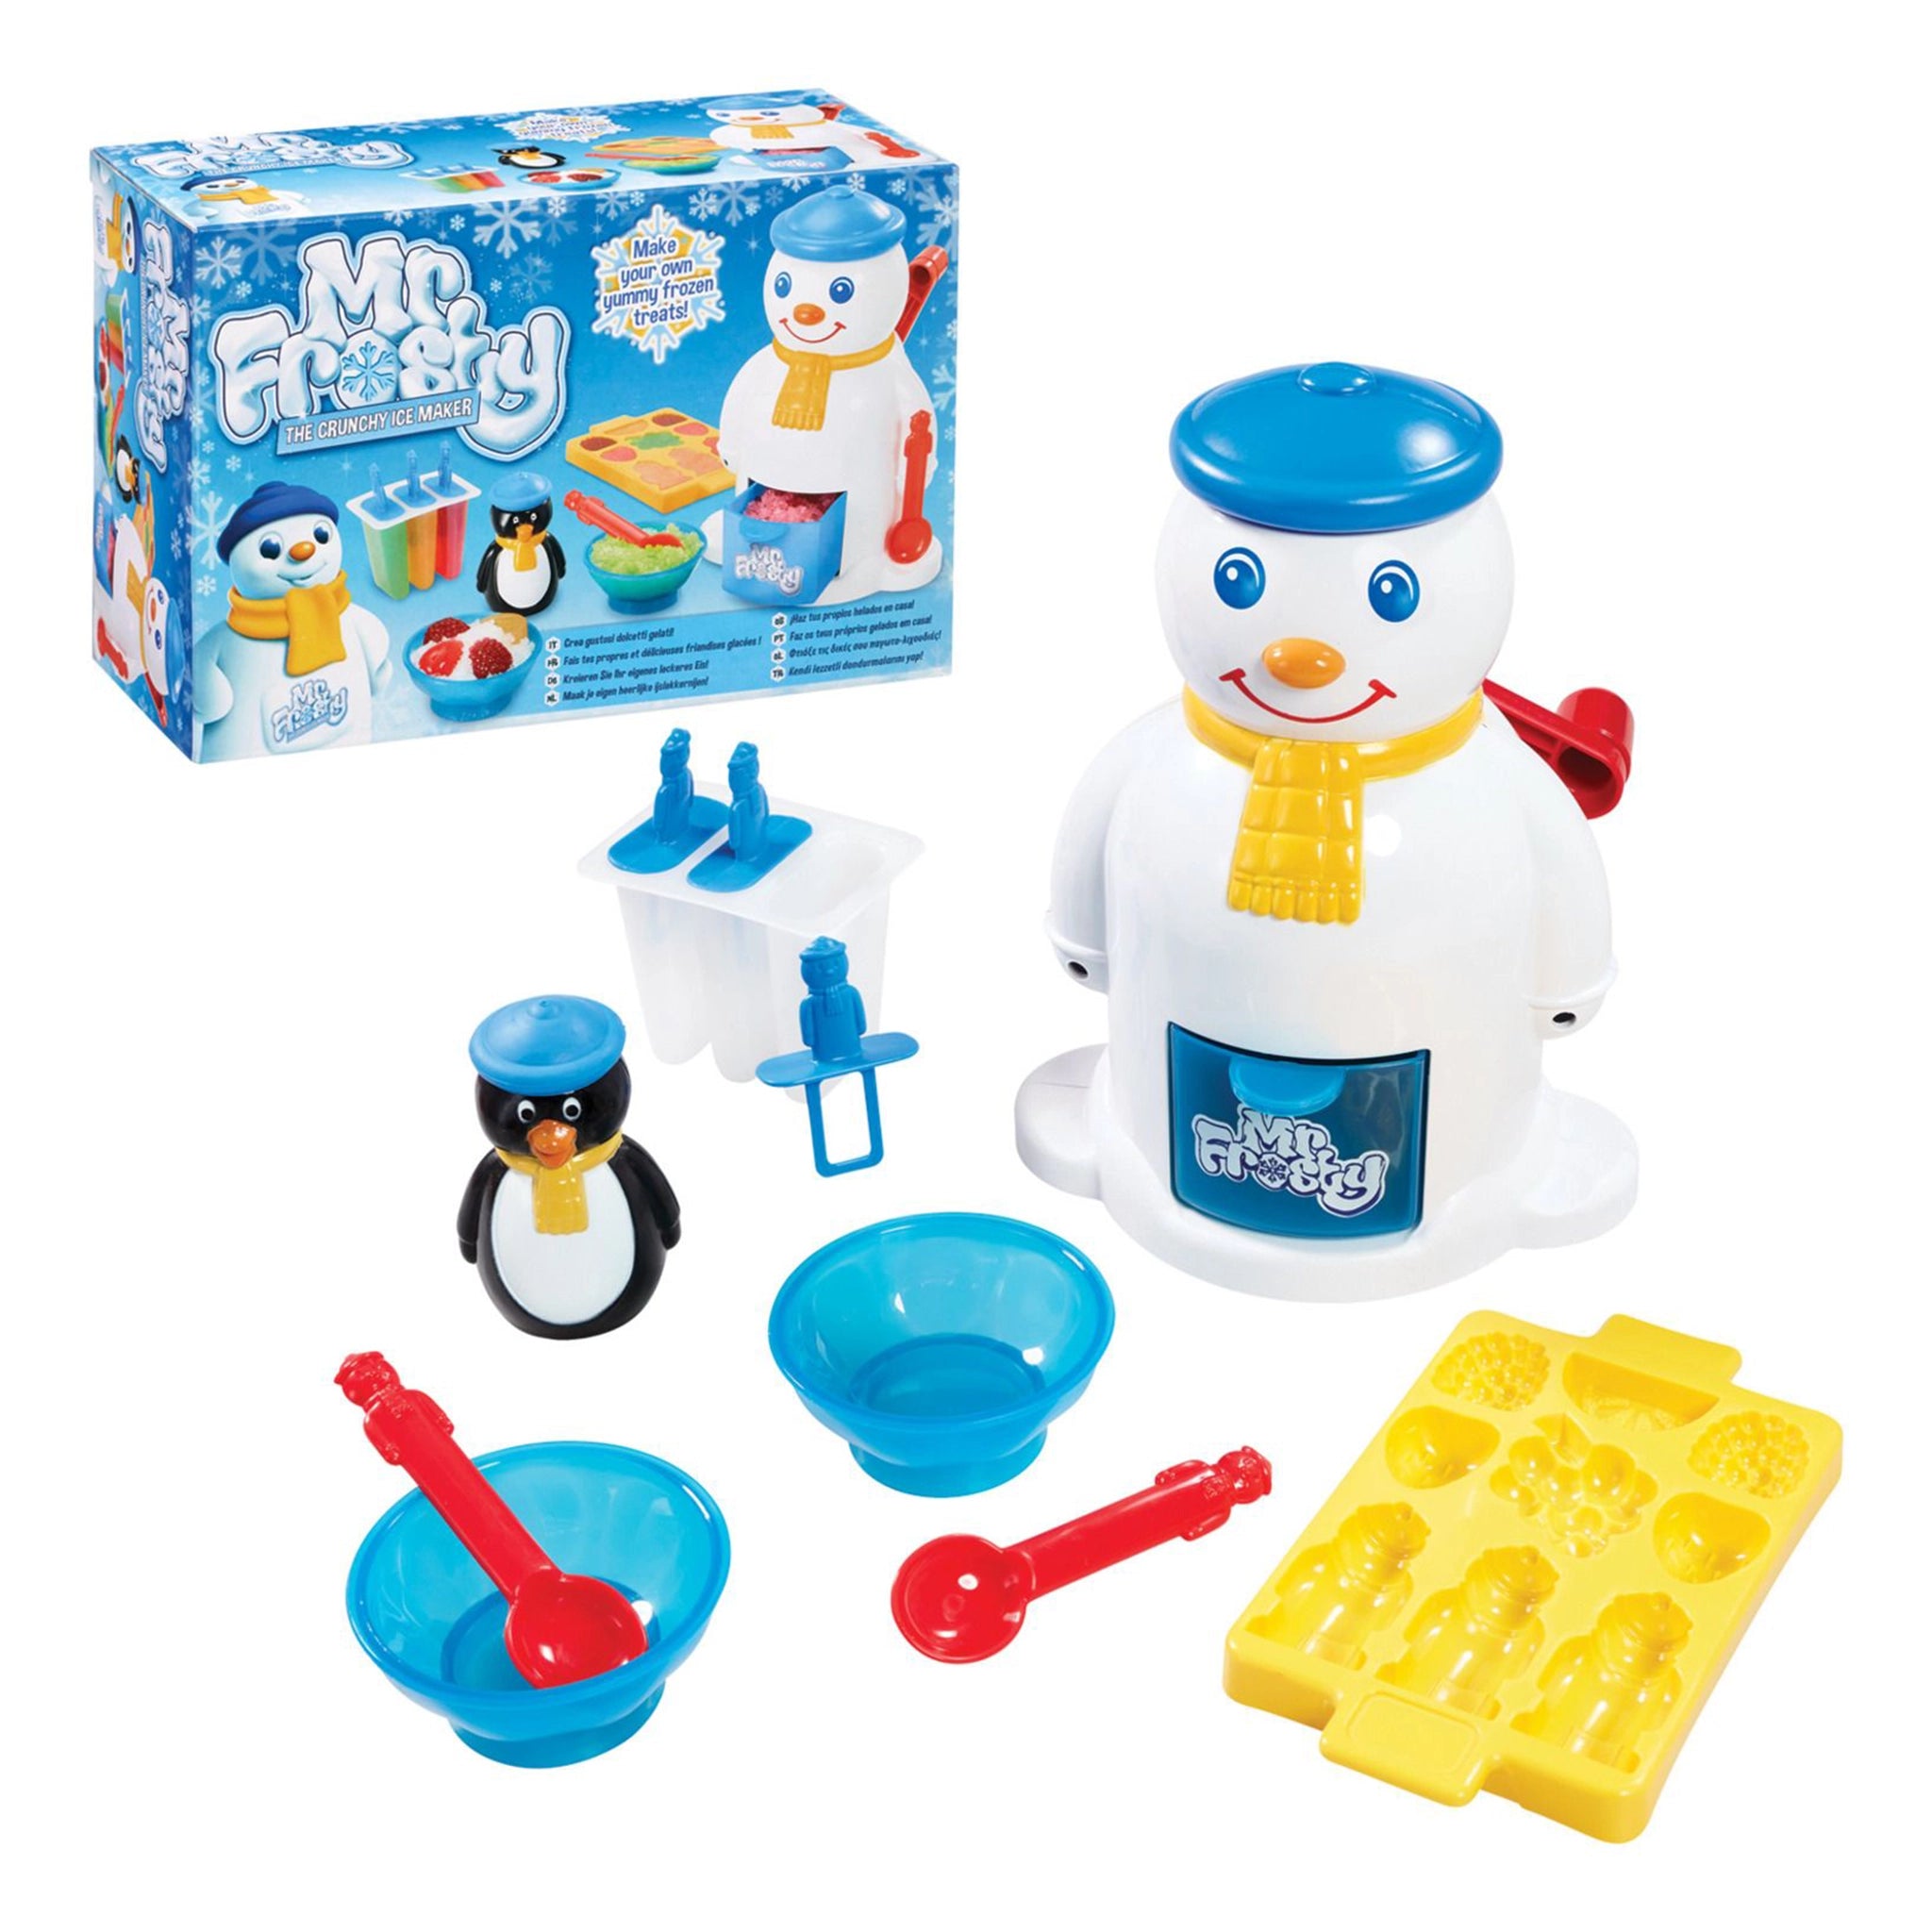 Reviewing The Original Mr Frosty The Ice Crunchy Maker